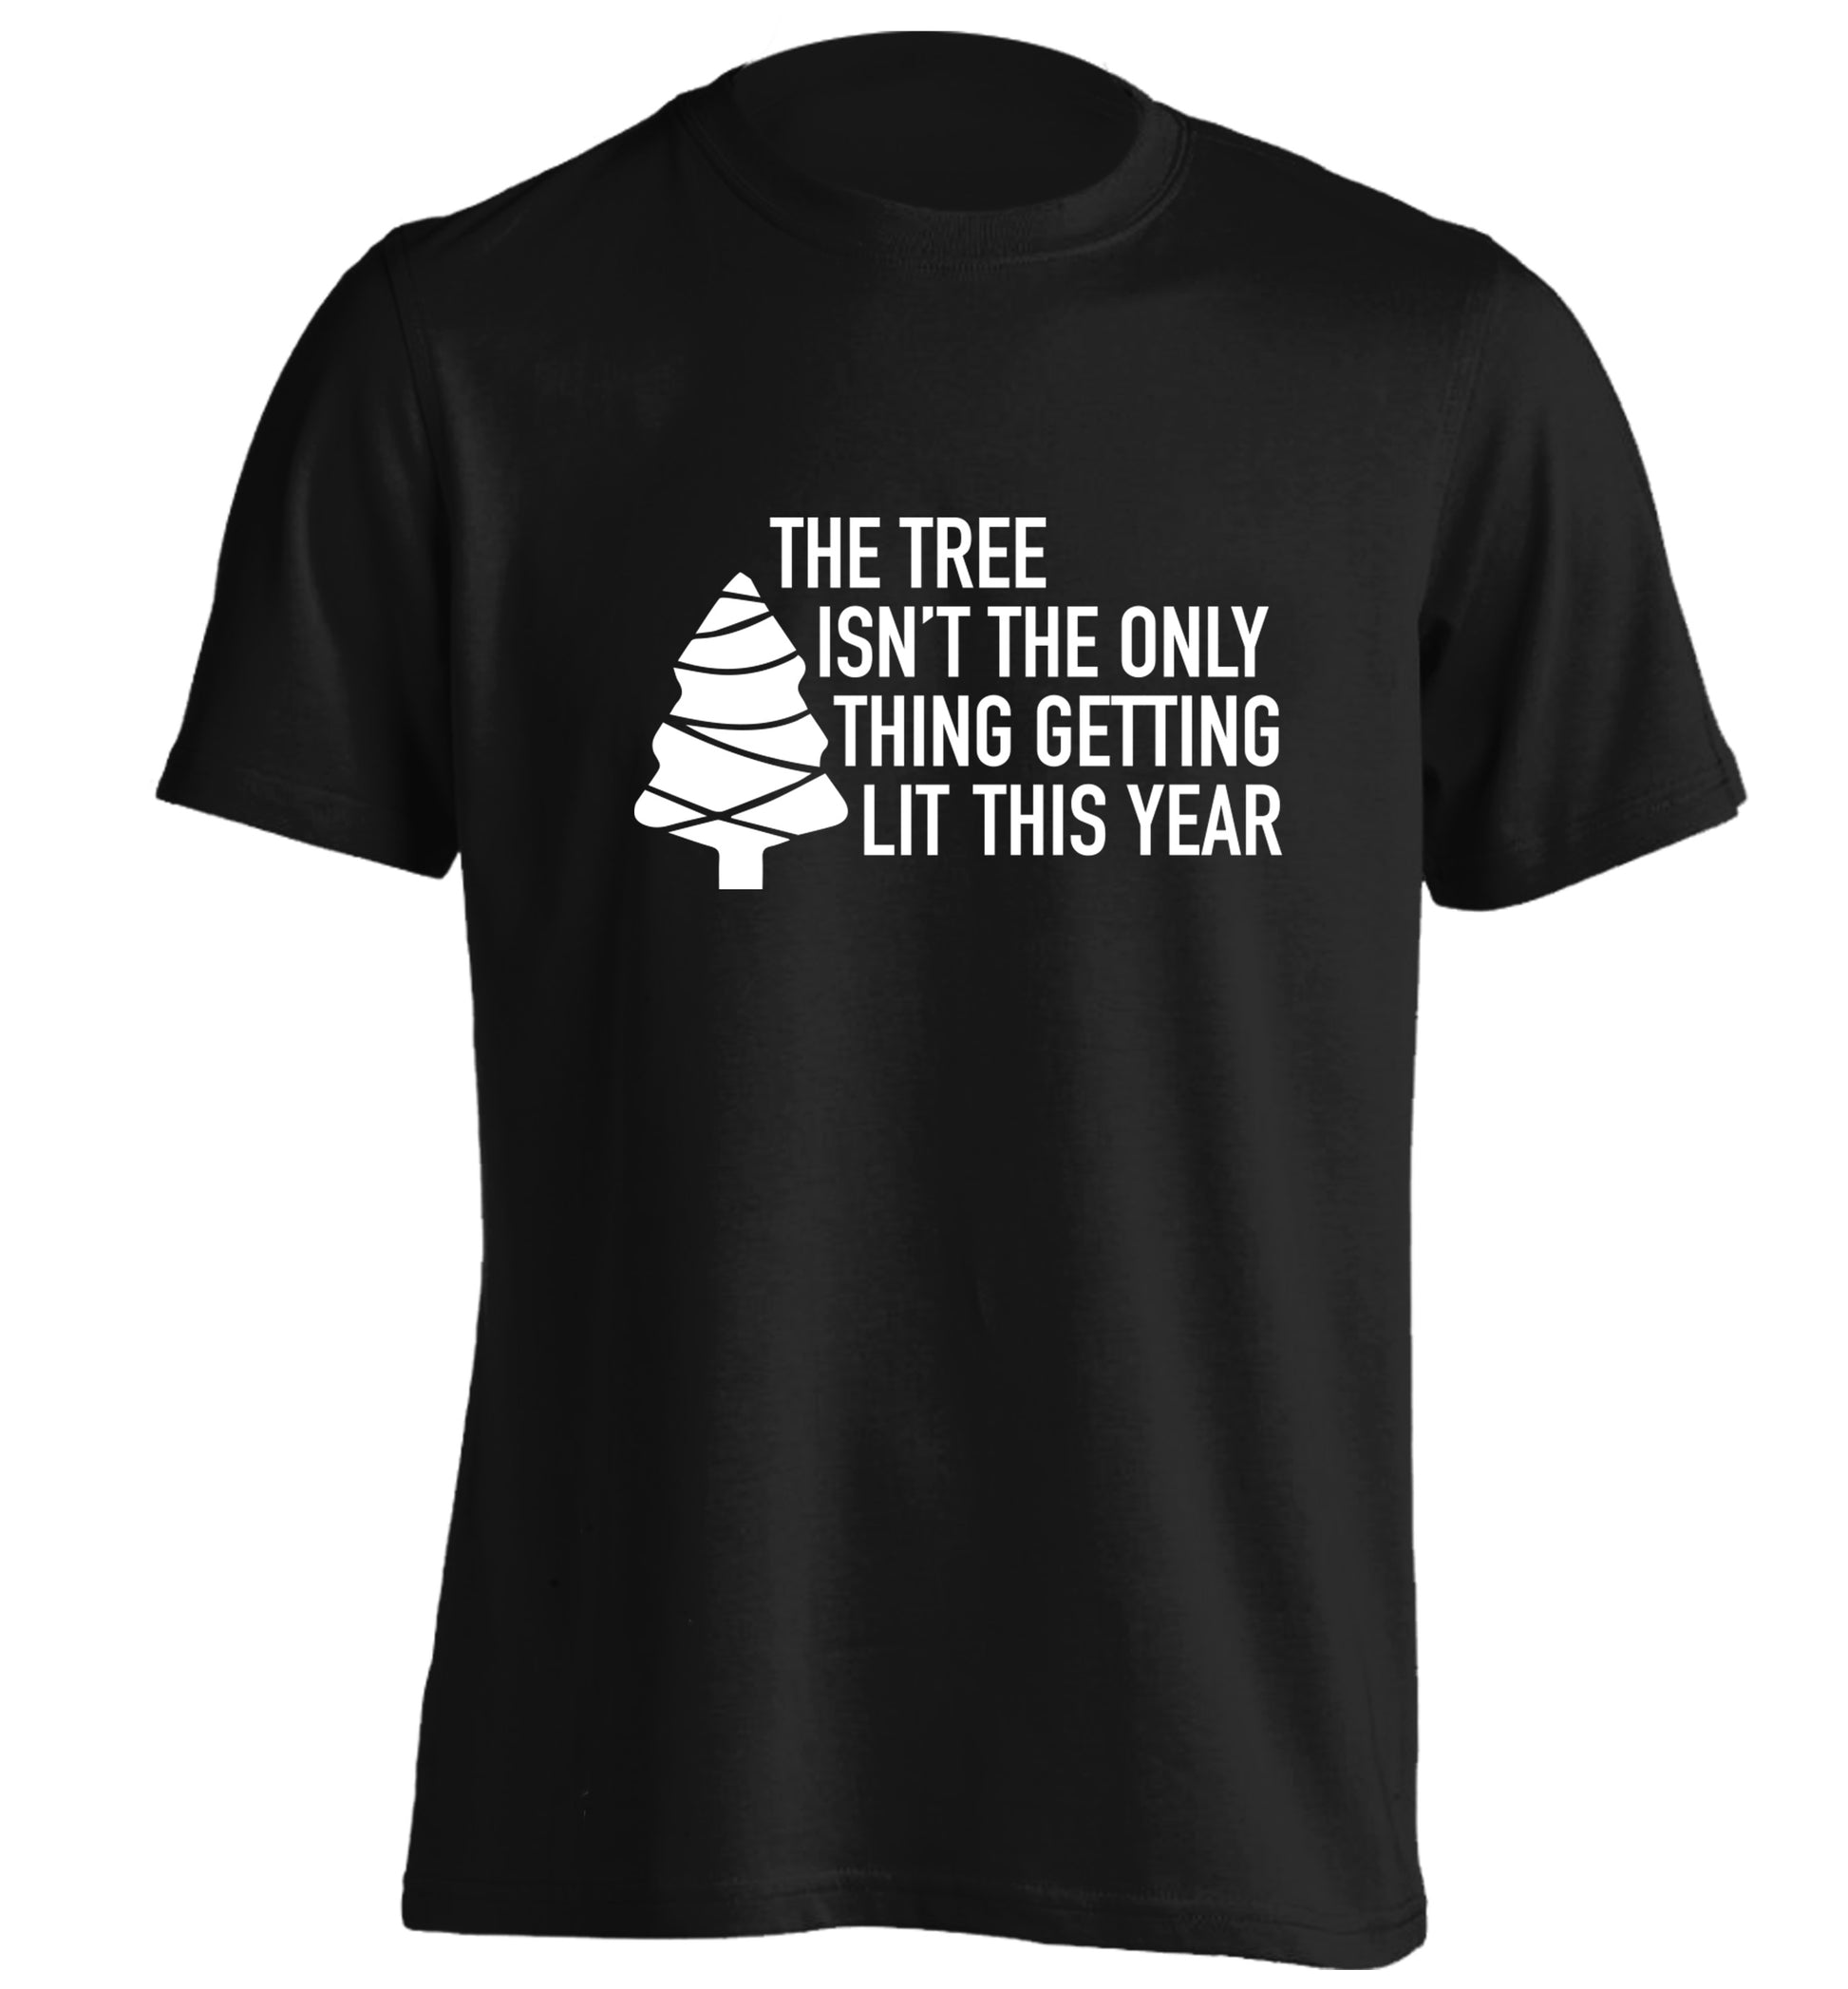 The tree isn't the only thing getting lit this year adults unisex black Tshirt 2XL